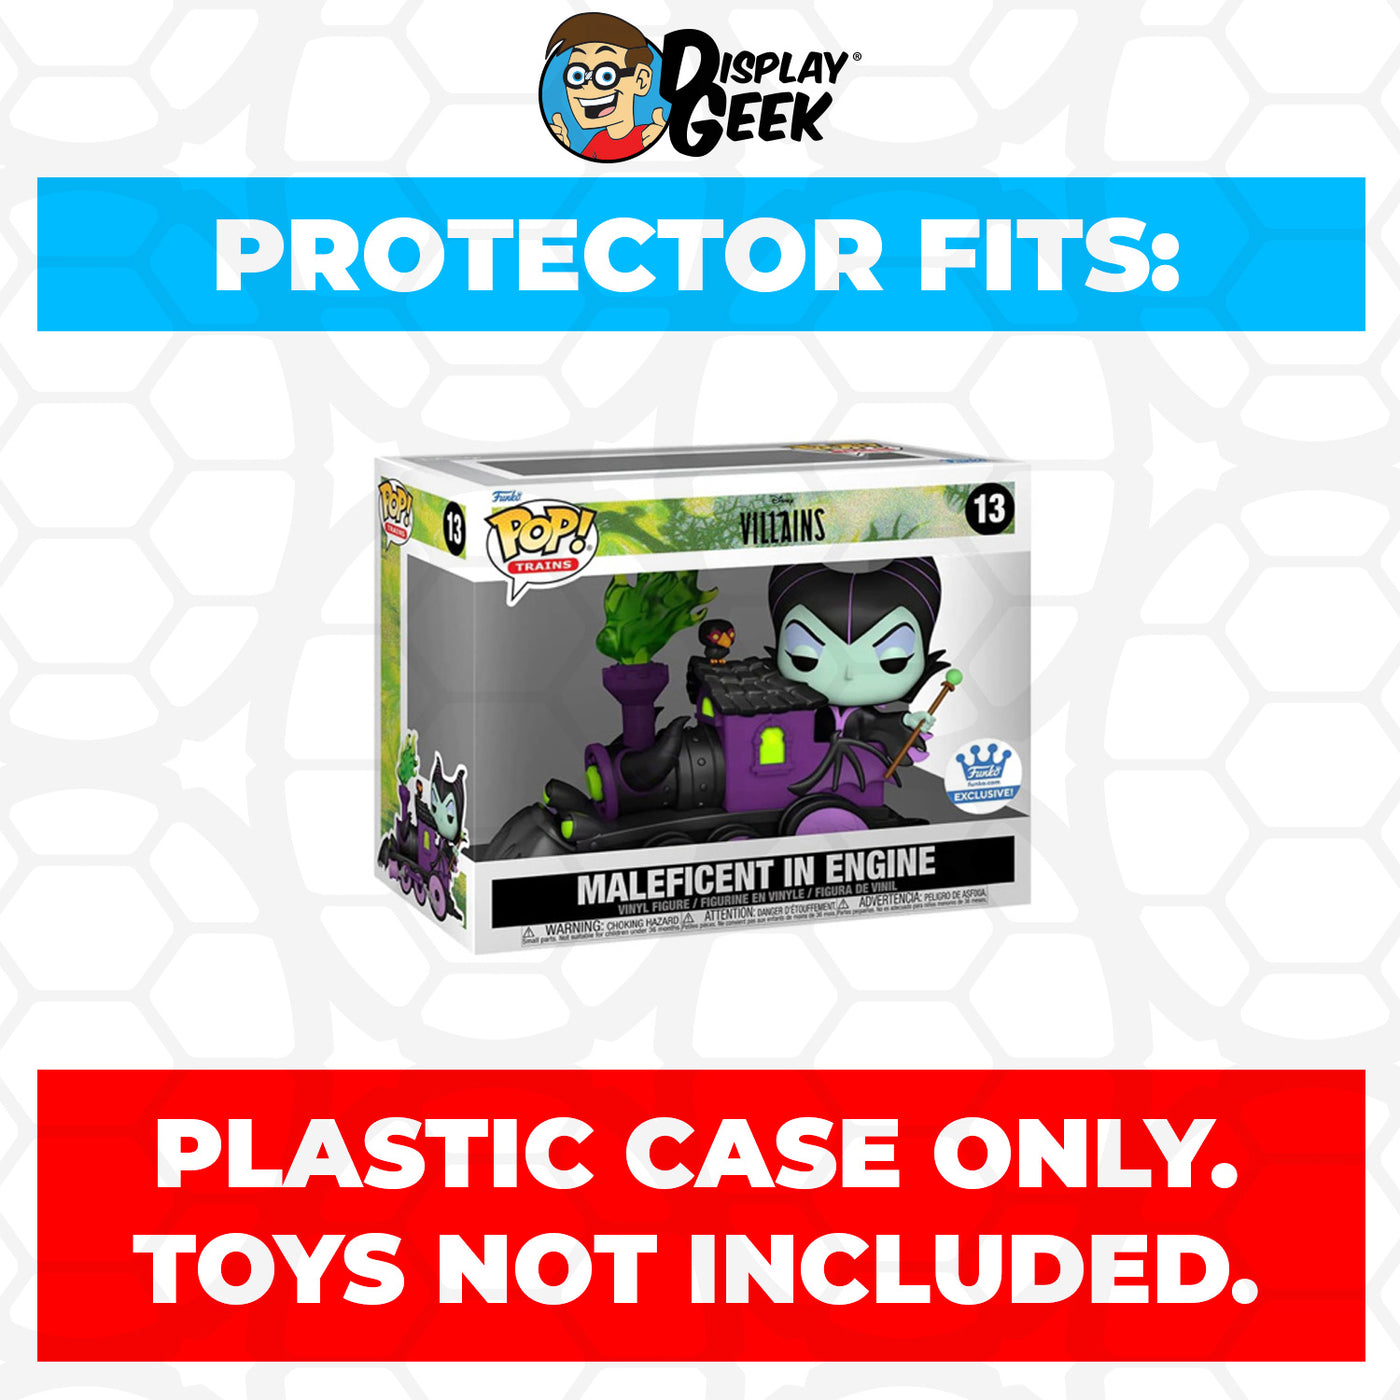 Pop Protector for Maleficent in Engine Funko Pop Trains on The Protector Guide App by Display Geek